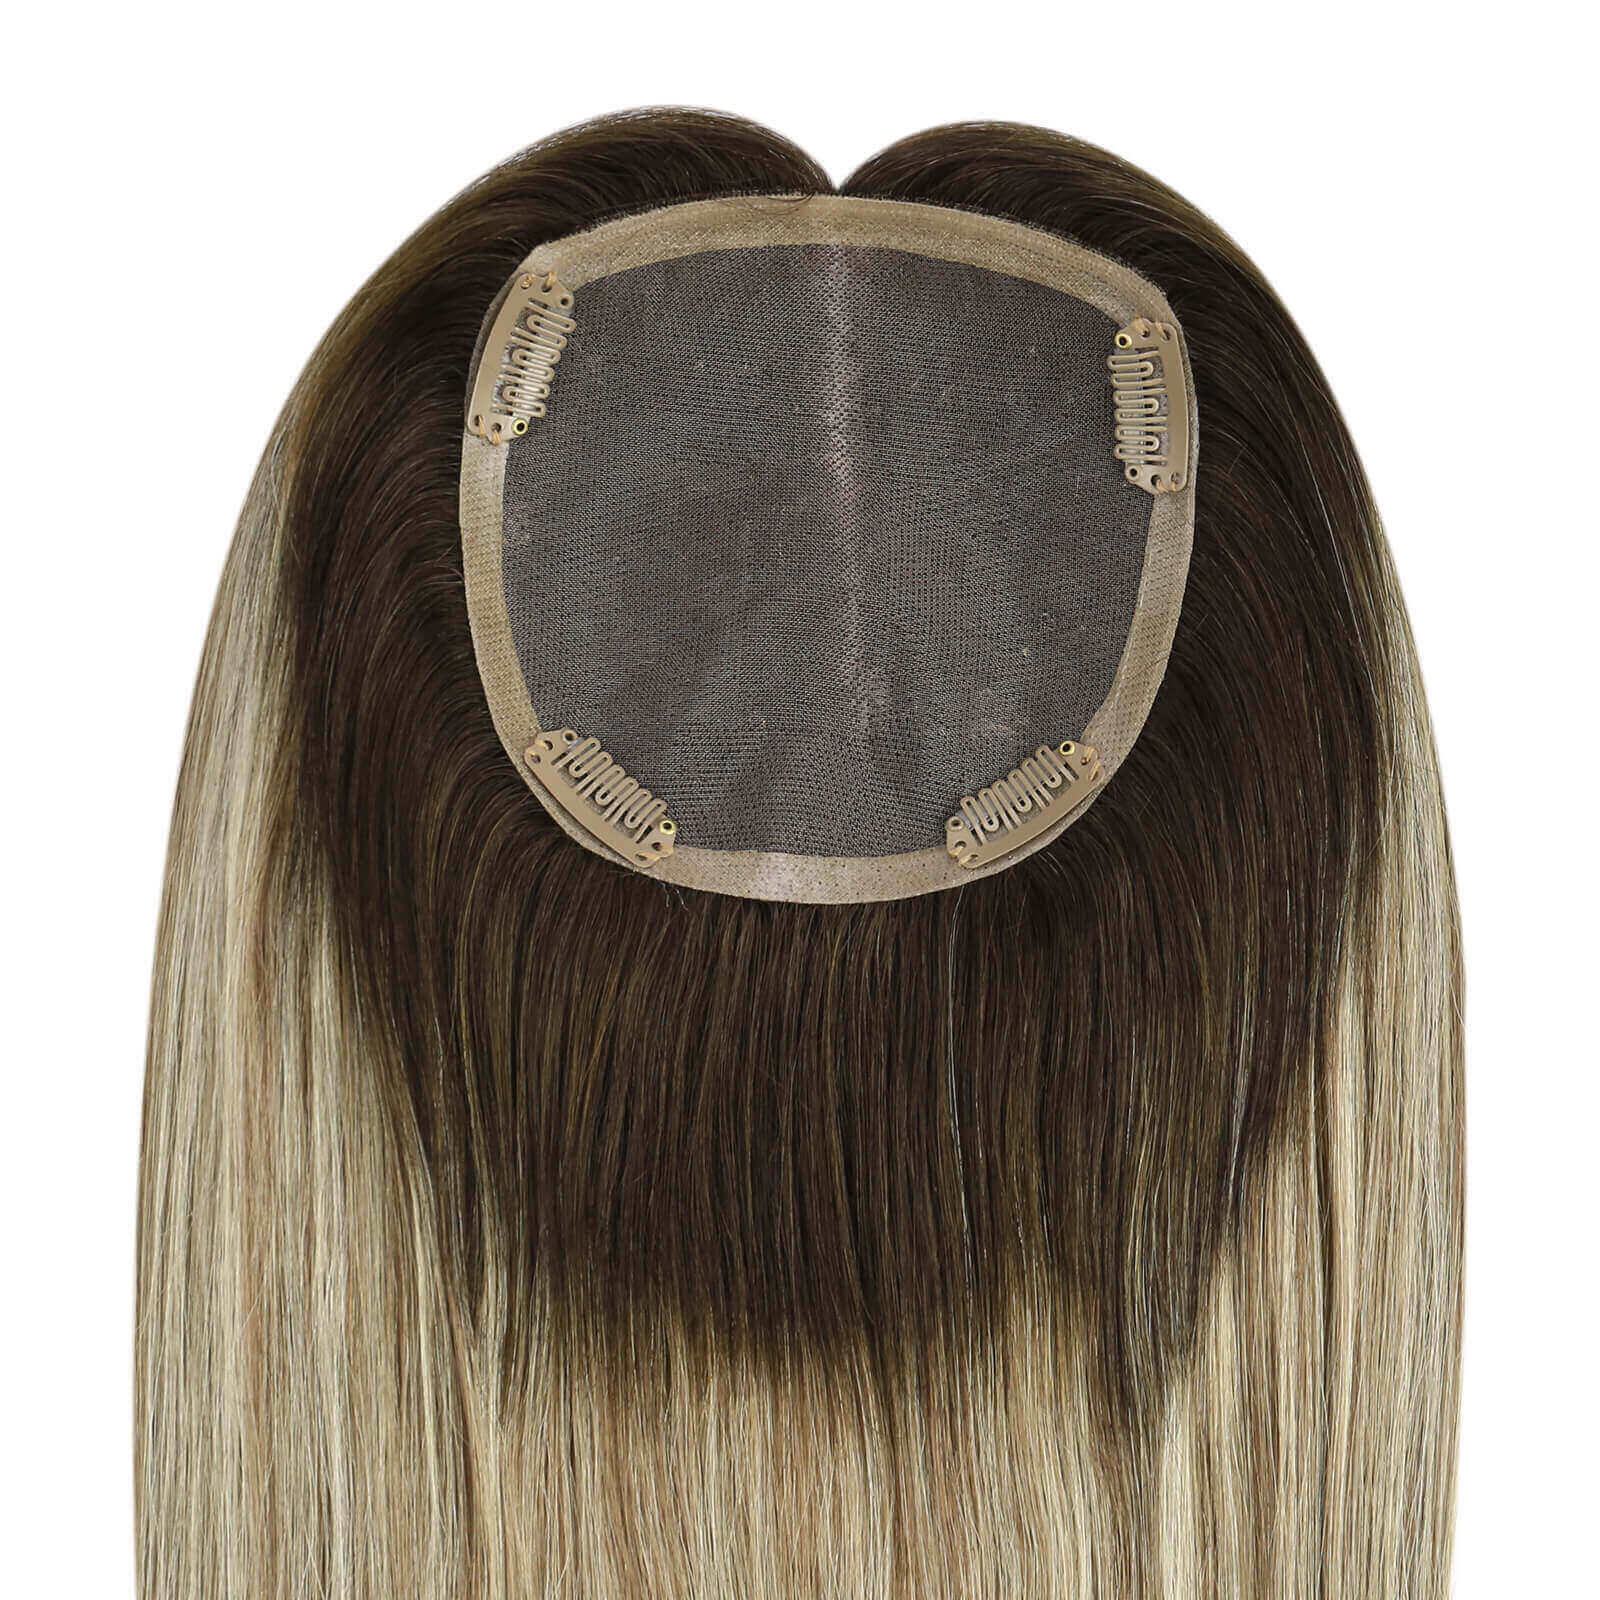 human hairpieces for women